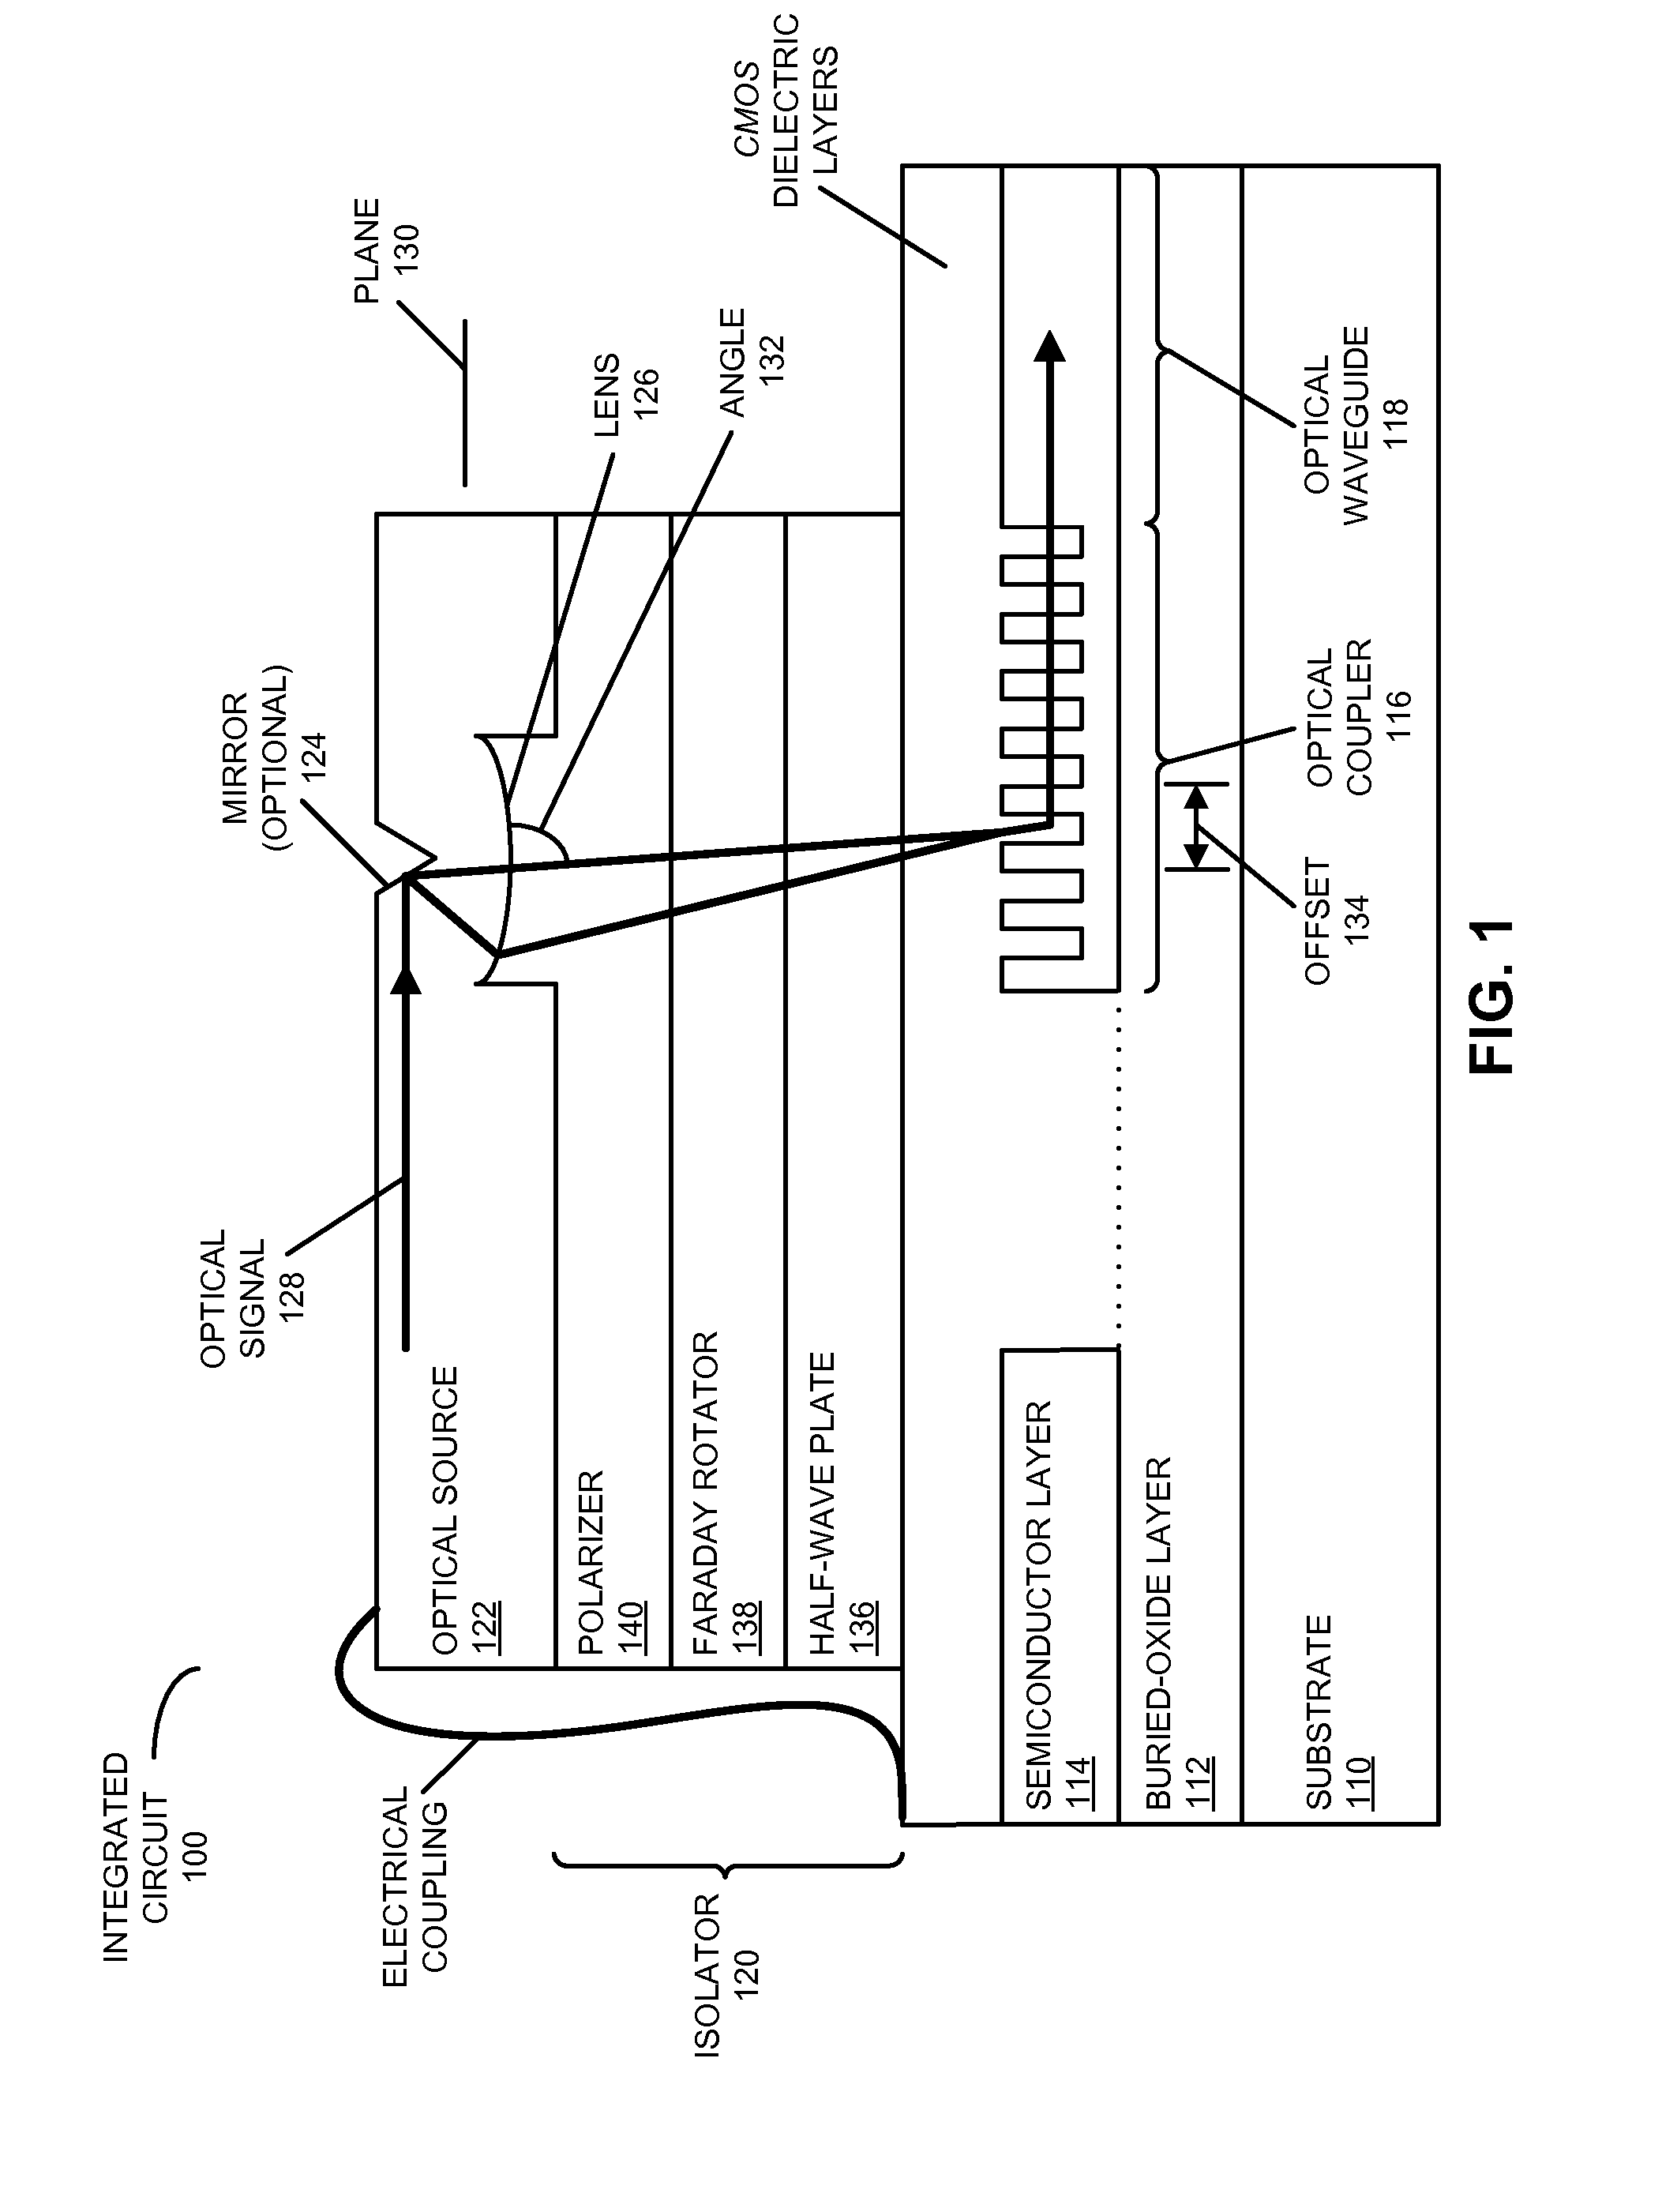 Integrated laser with back-reflection isolator